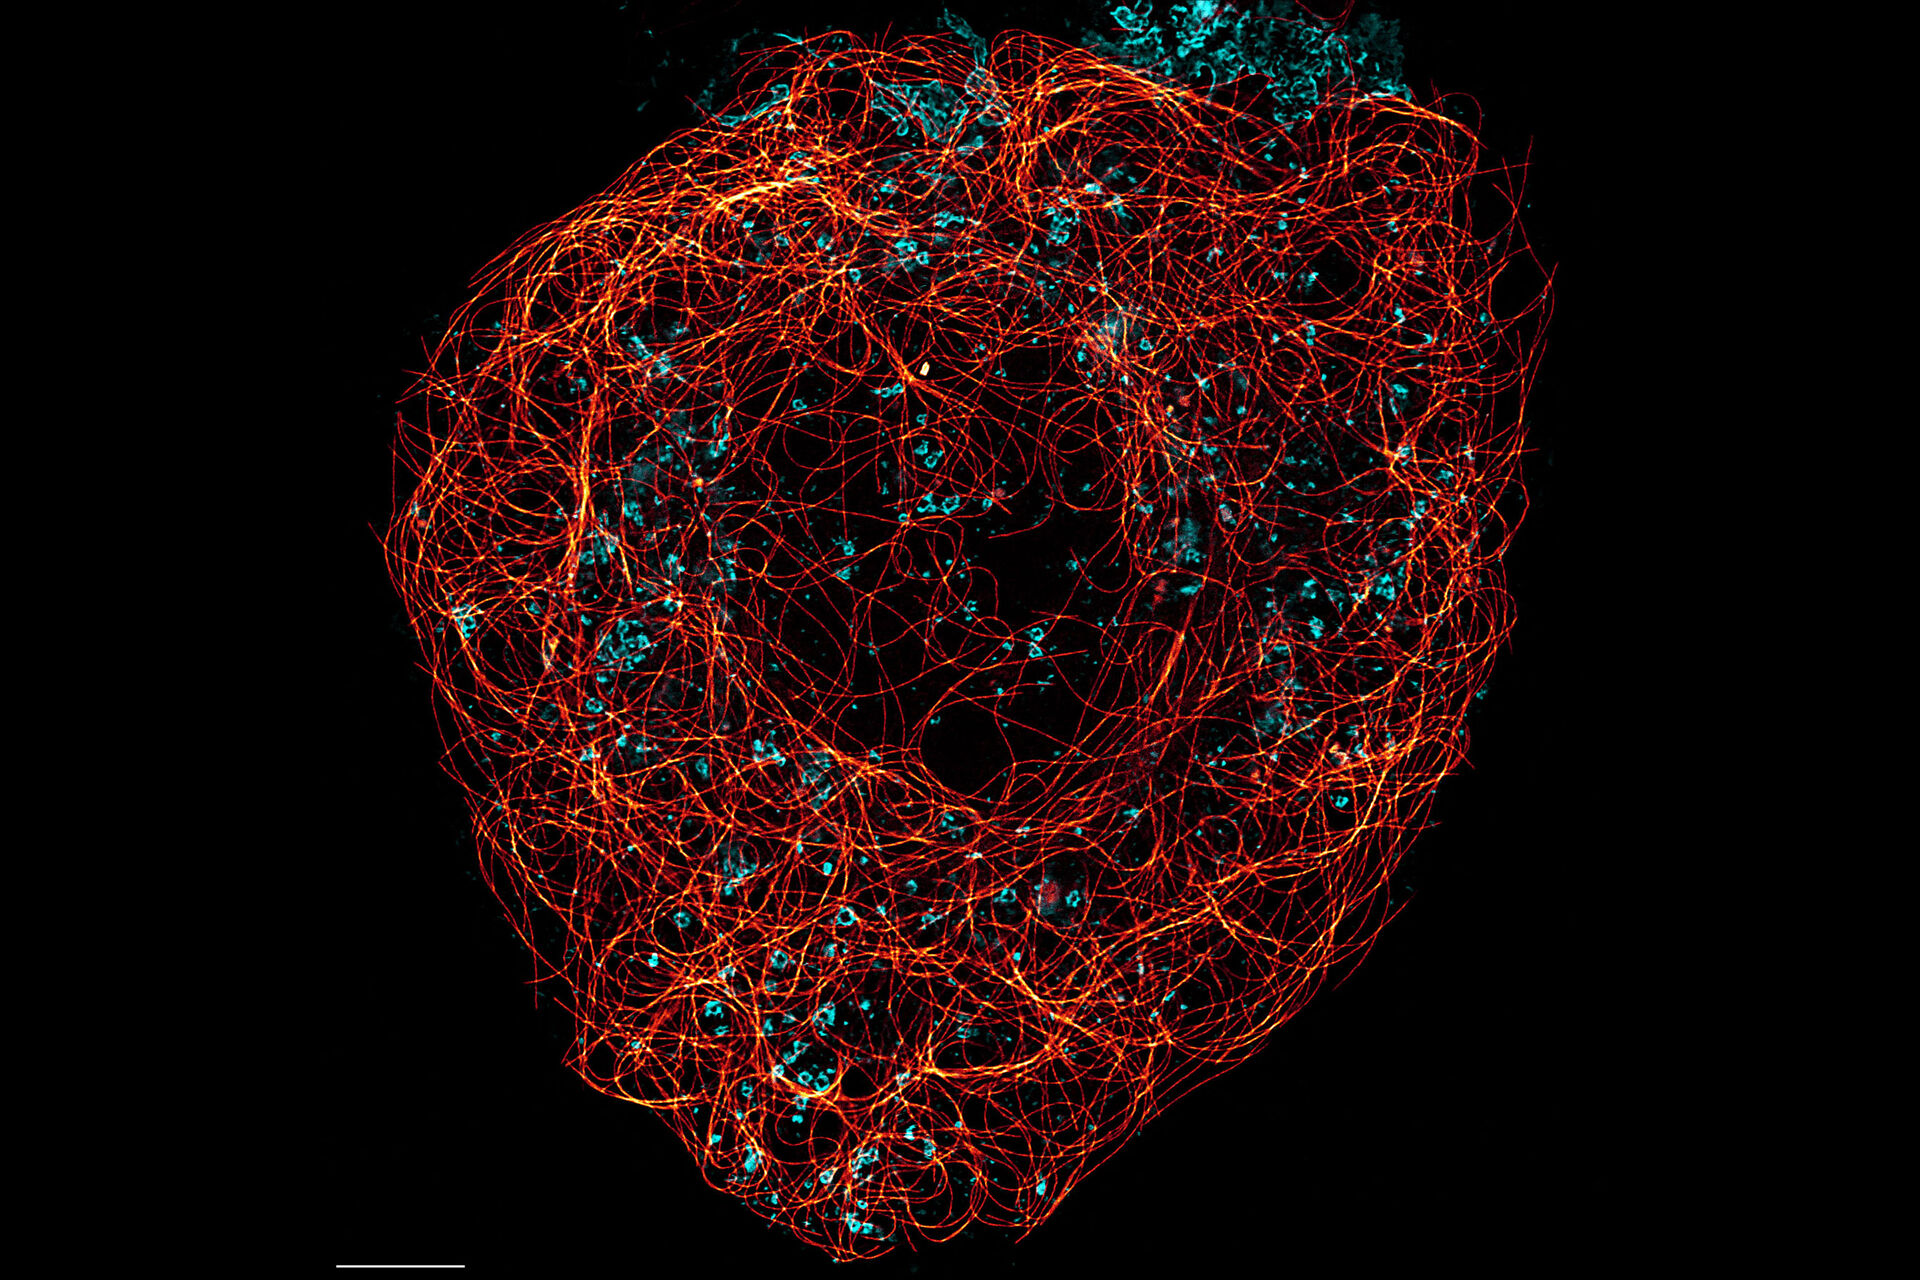 Cytoskeleton and membranes in live cell imaged with TauSTED - STED